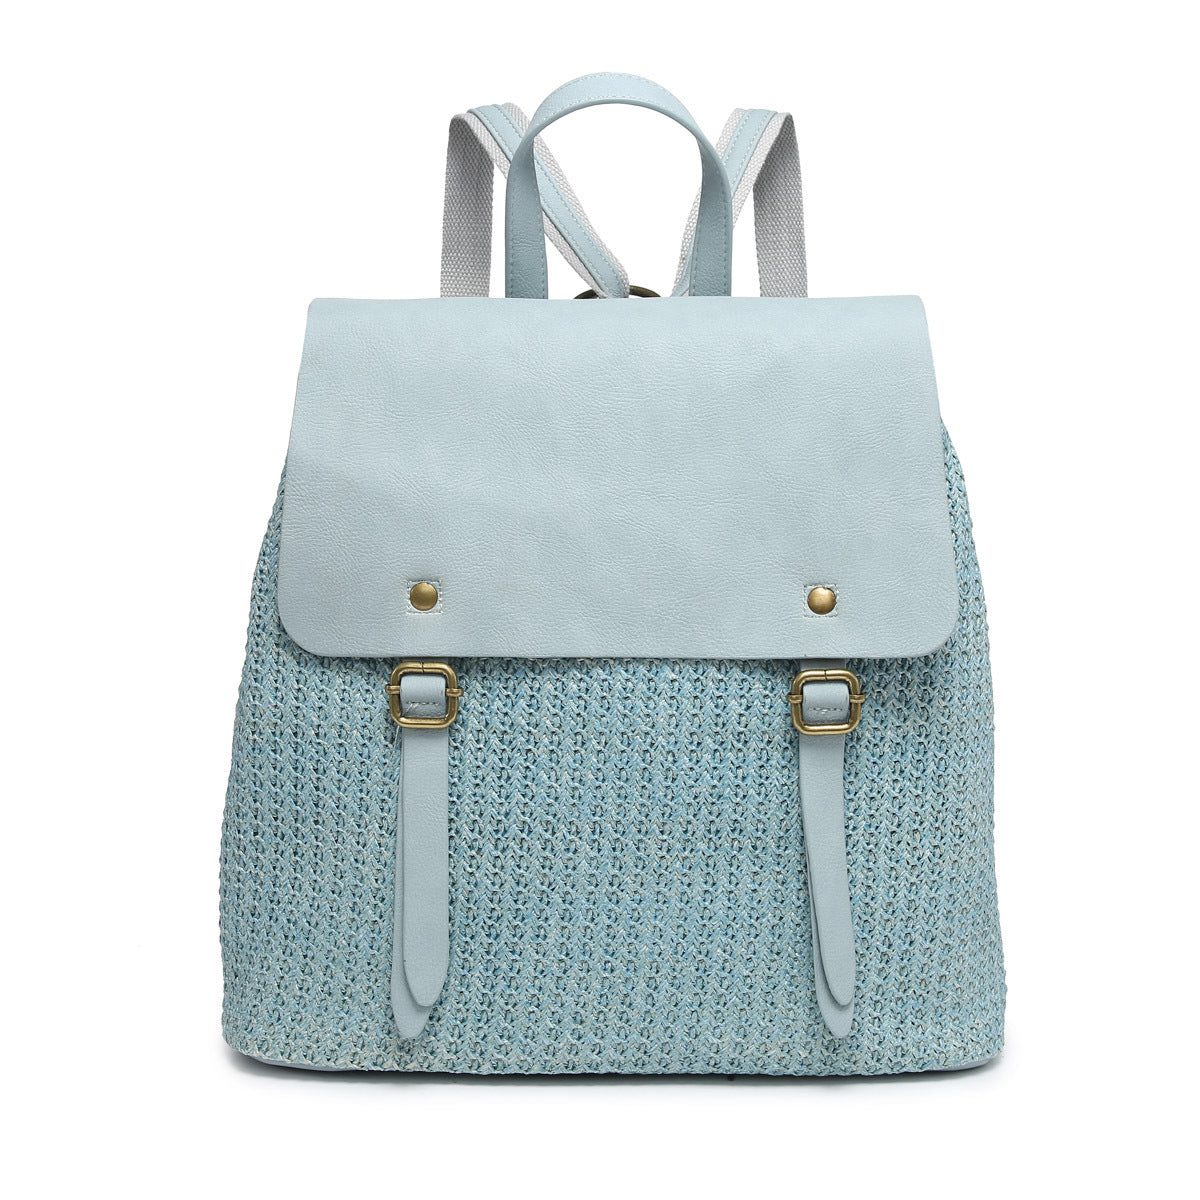 Woven Backpack with Flapover Closure